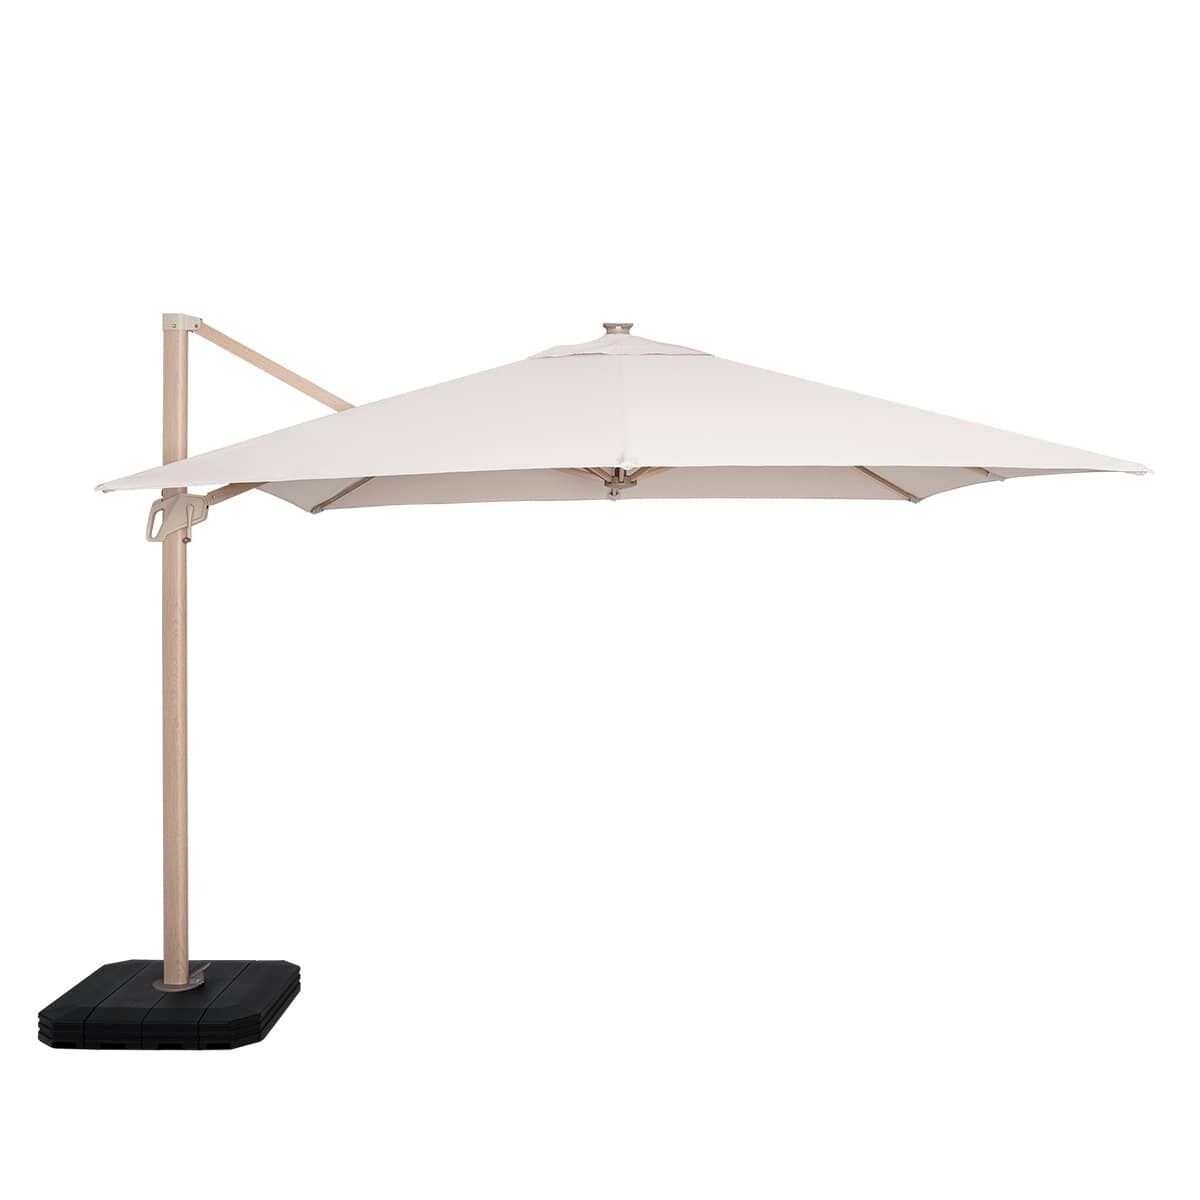 Maze Outdoor Zeus Cantilever Parasol 3m Square - With LED Lights & Cover - Wood Effect